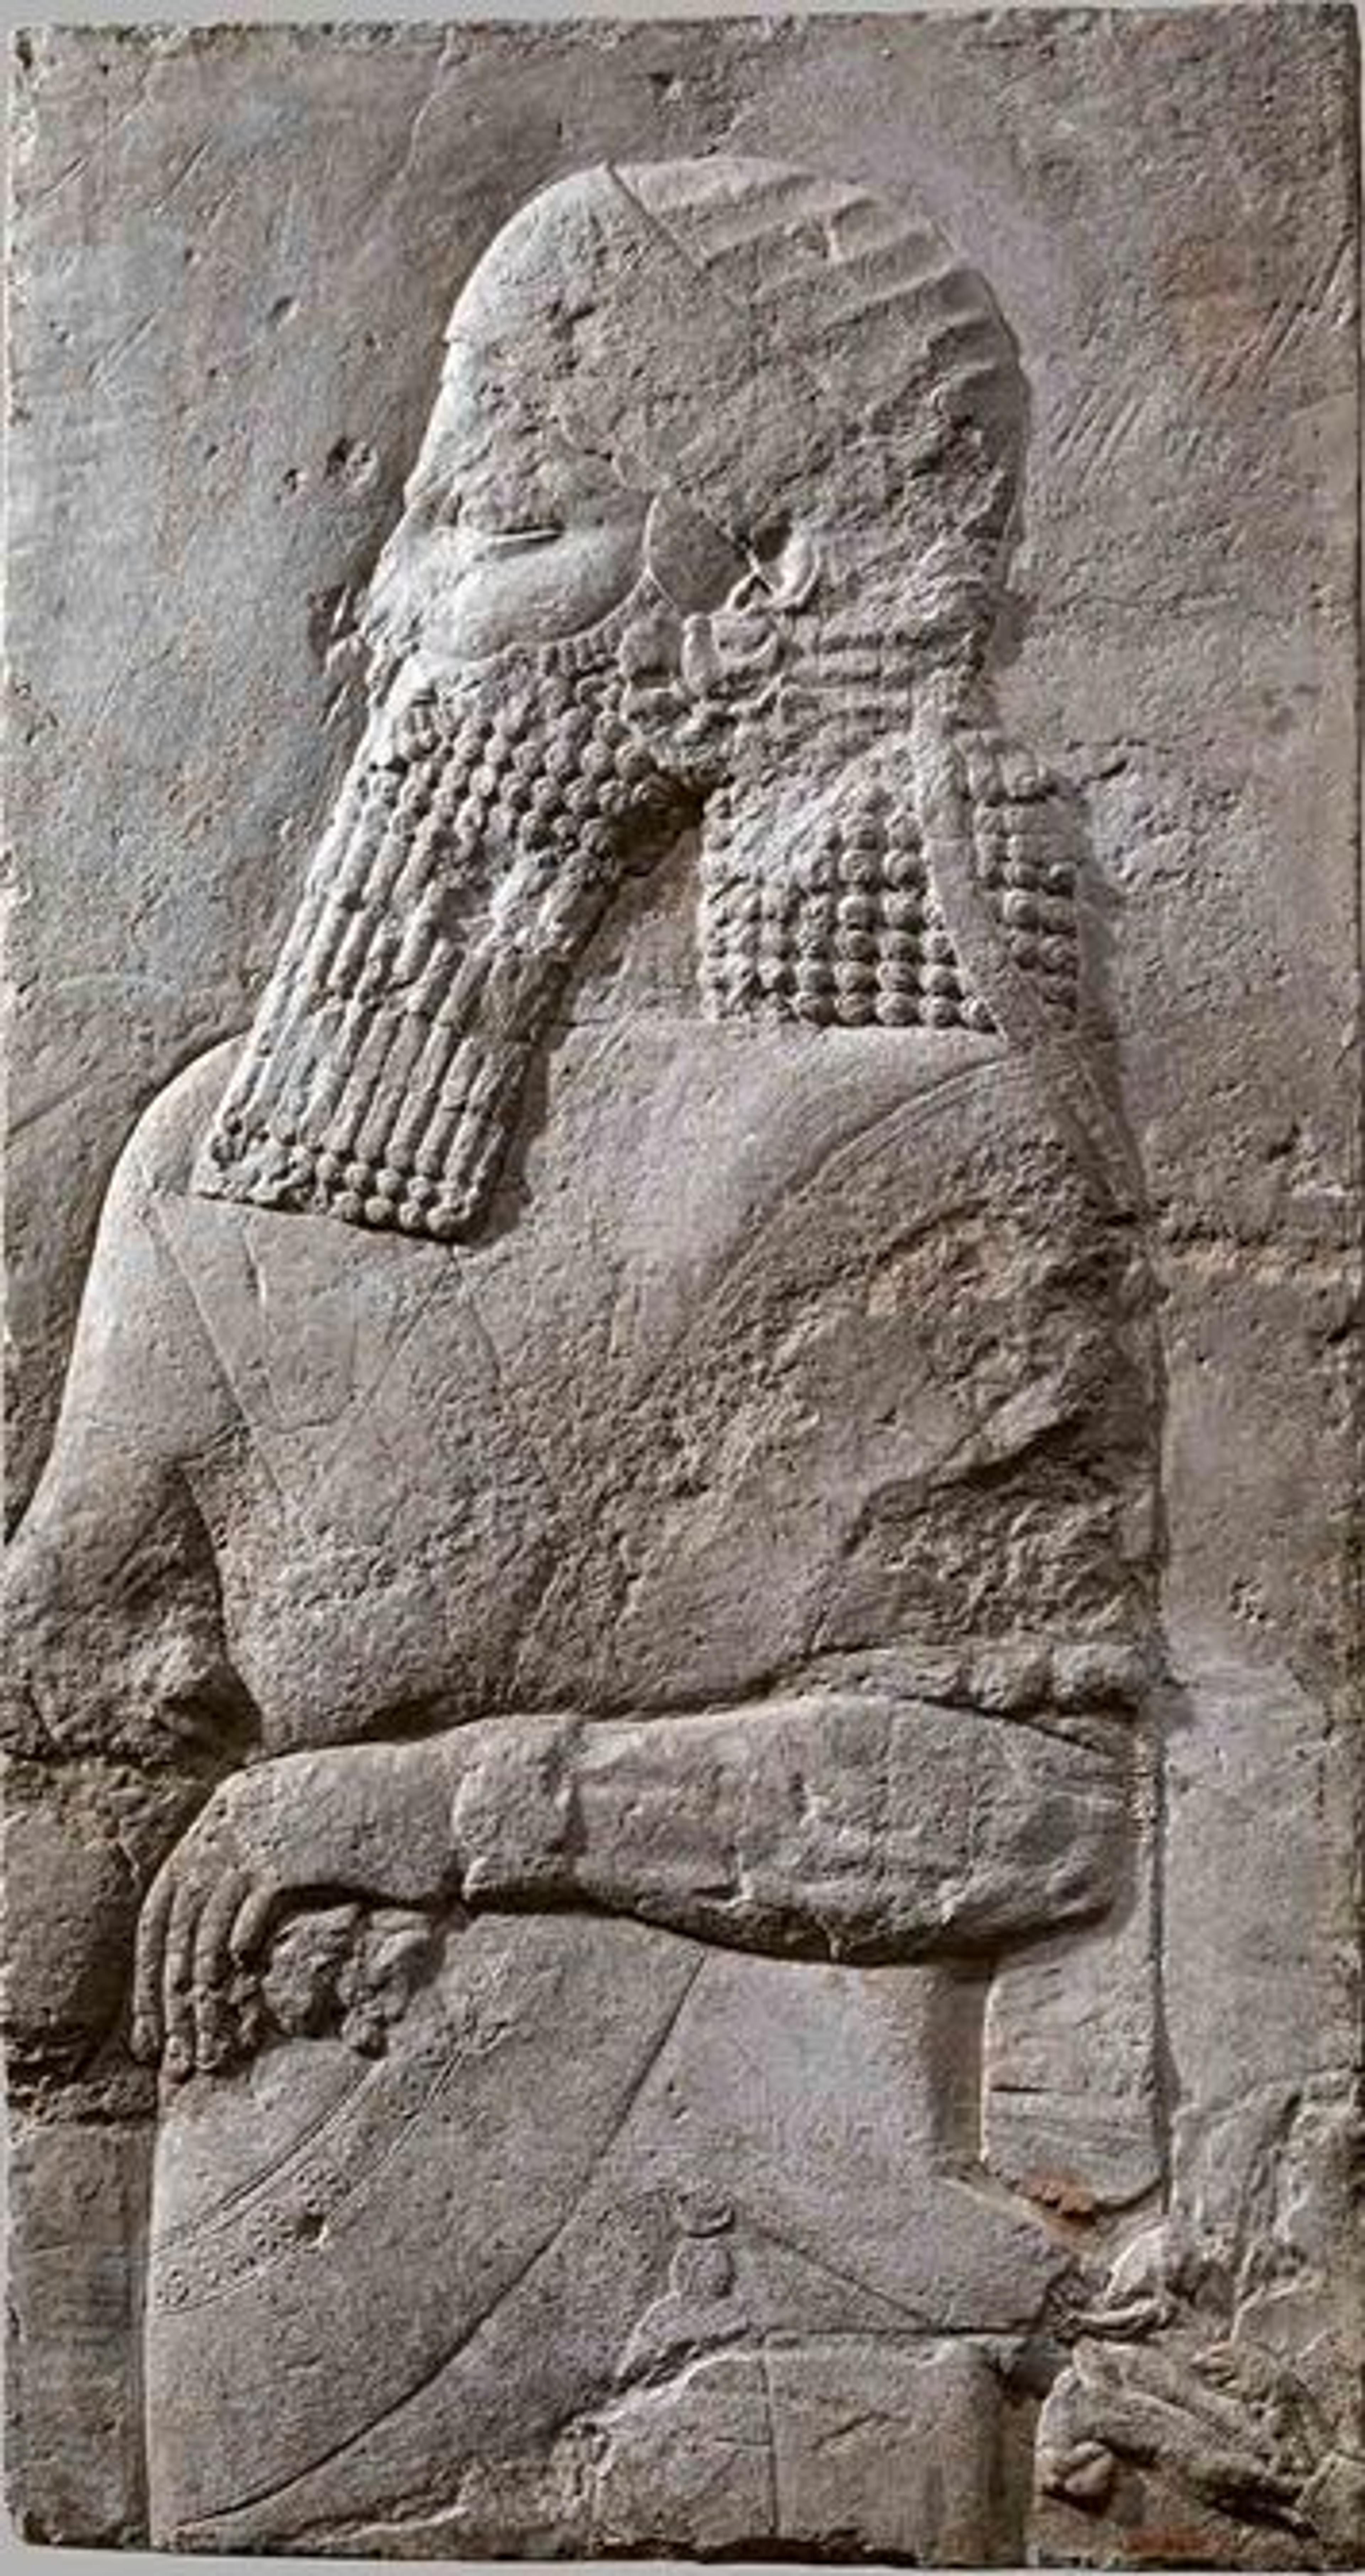 Relief sculpture showing Assyrian prince in profile view